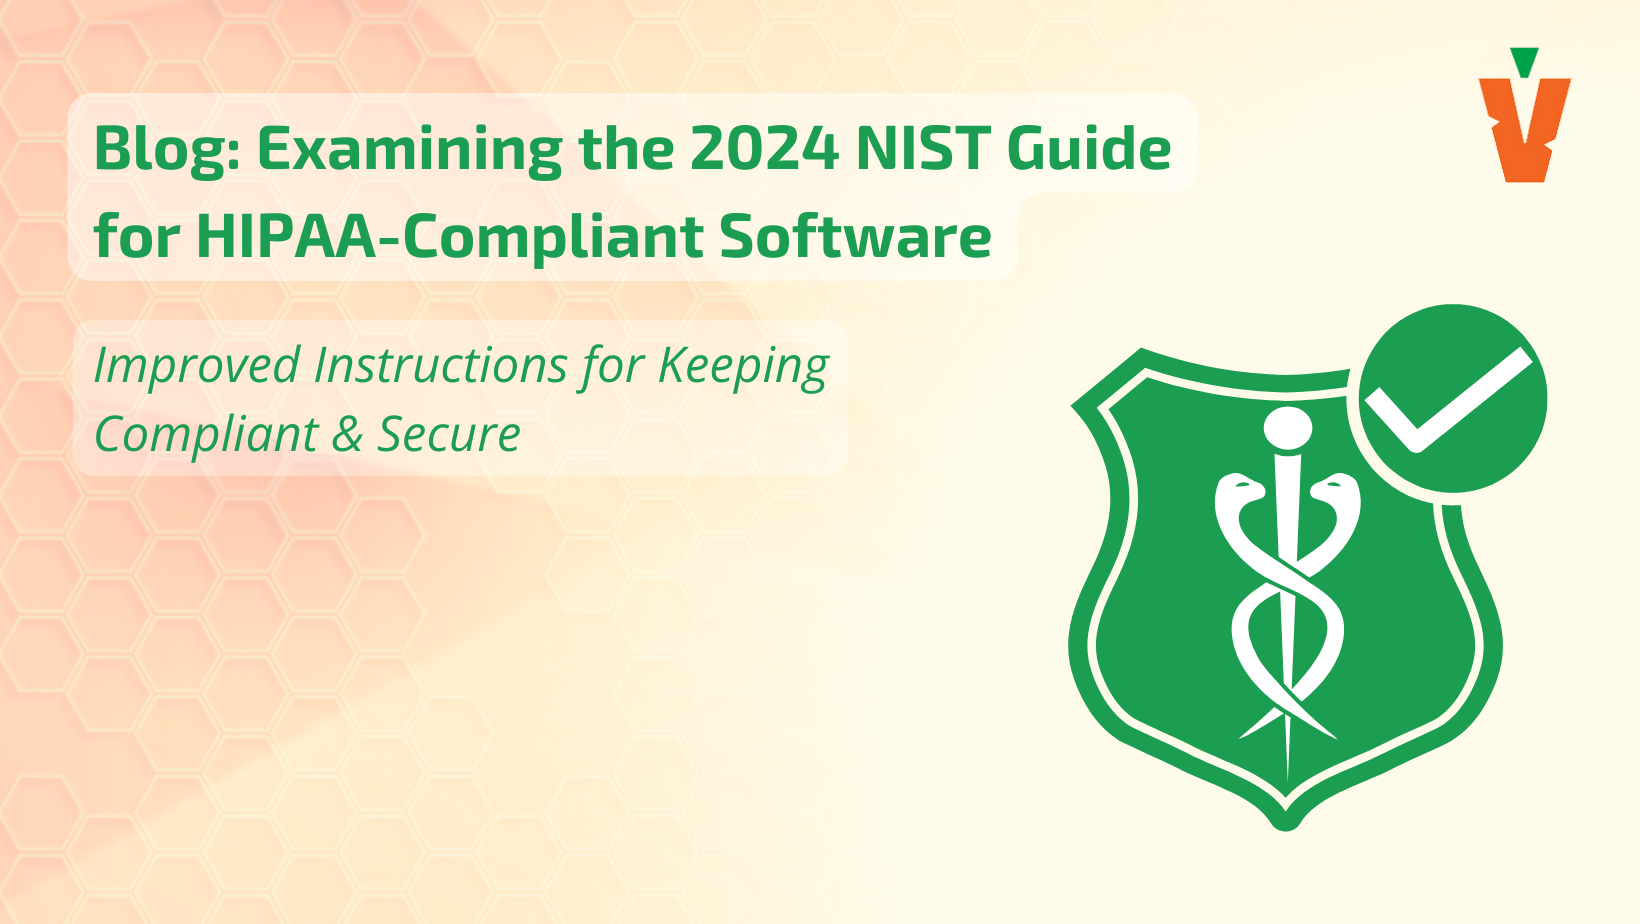 Examining the 2024 NIST Guide for HIPAA-Compliant Software